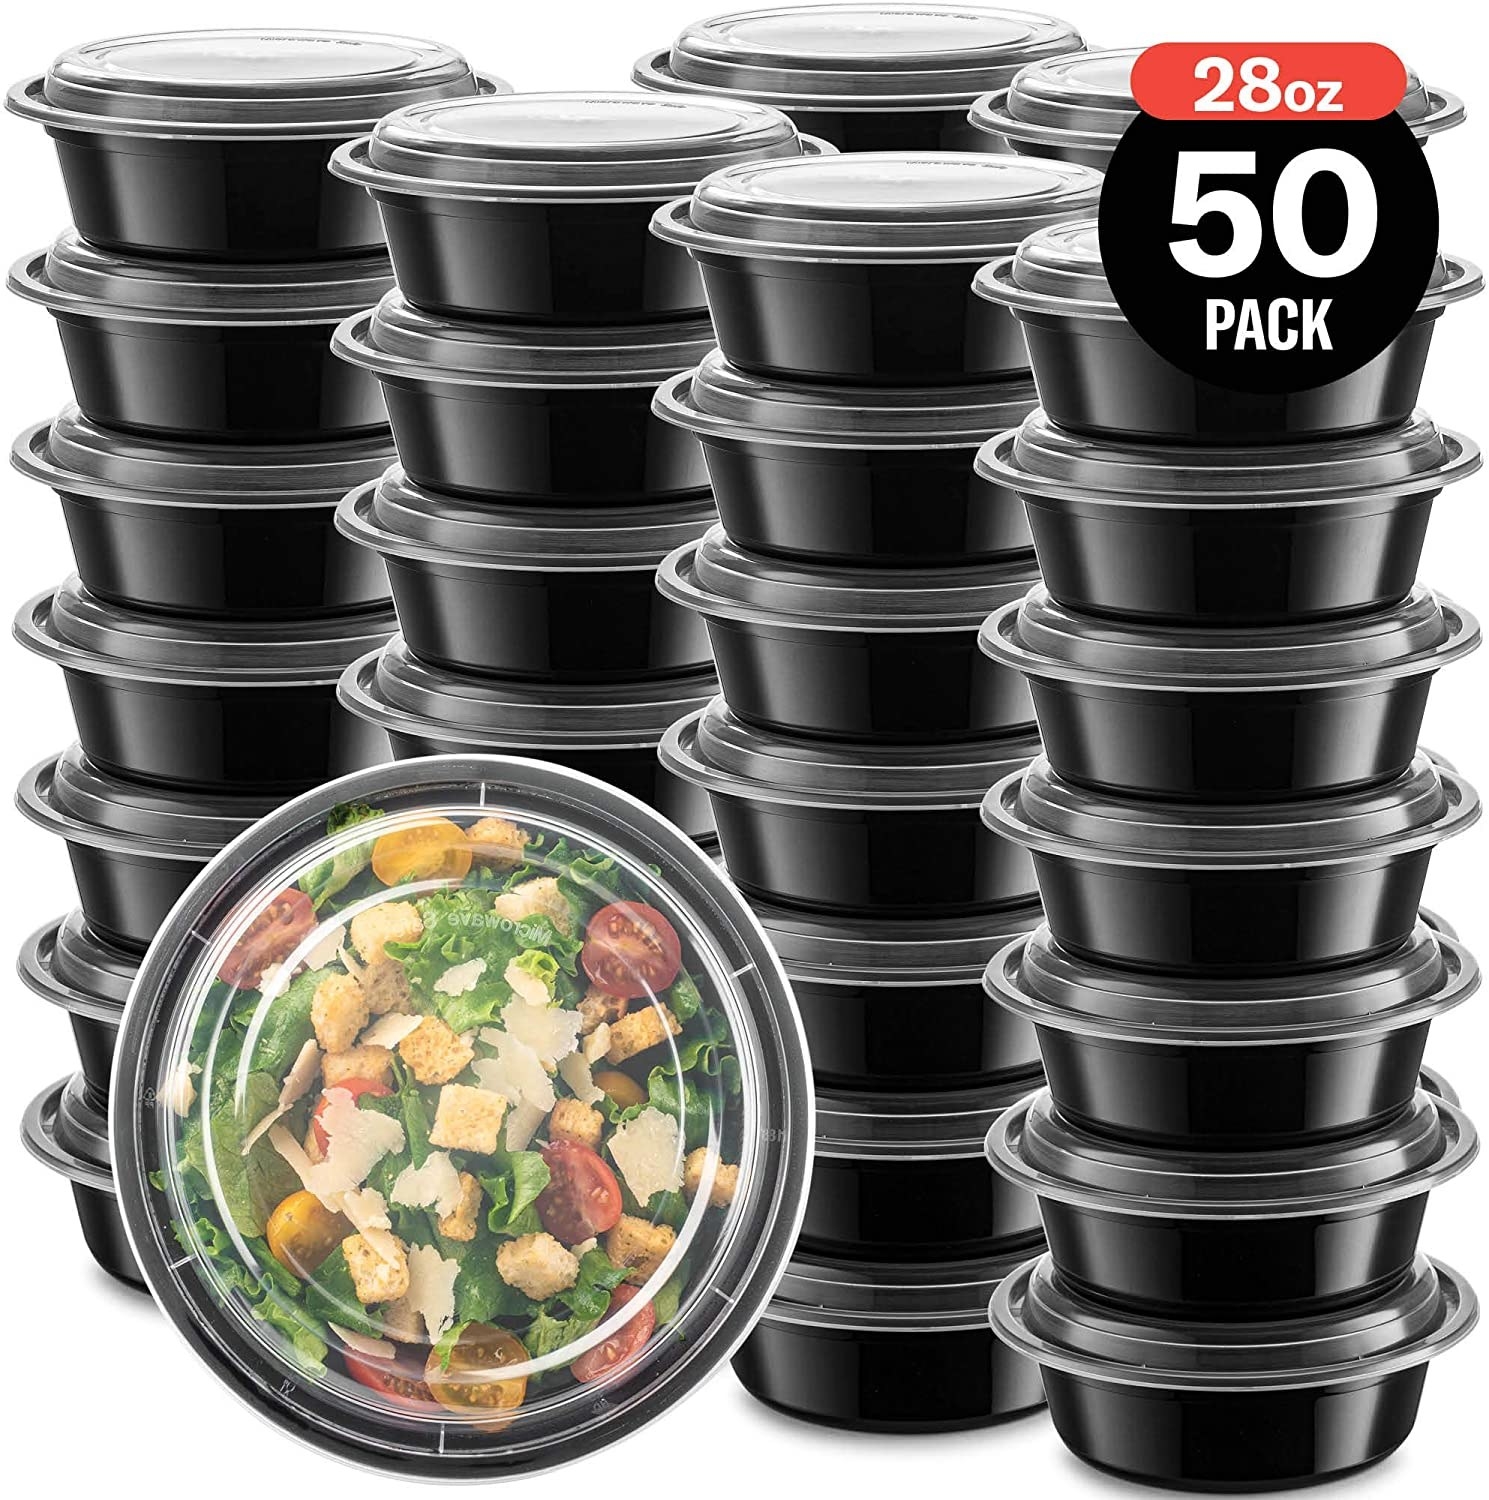 The black containers with clear lids, stacked on top of one another